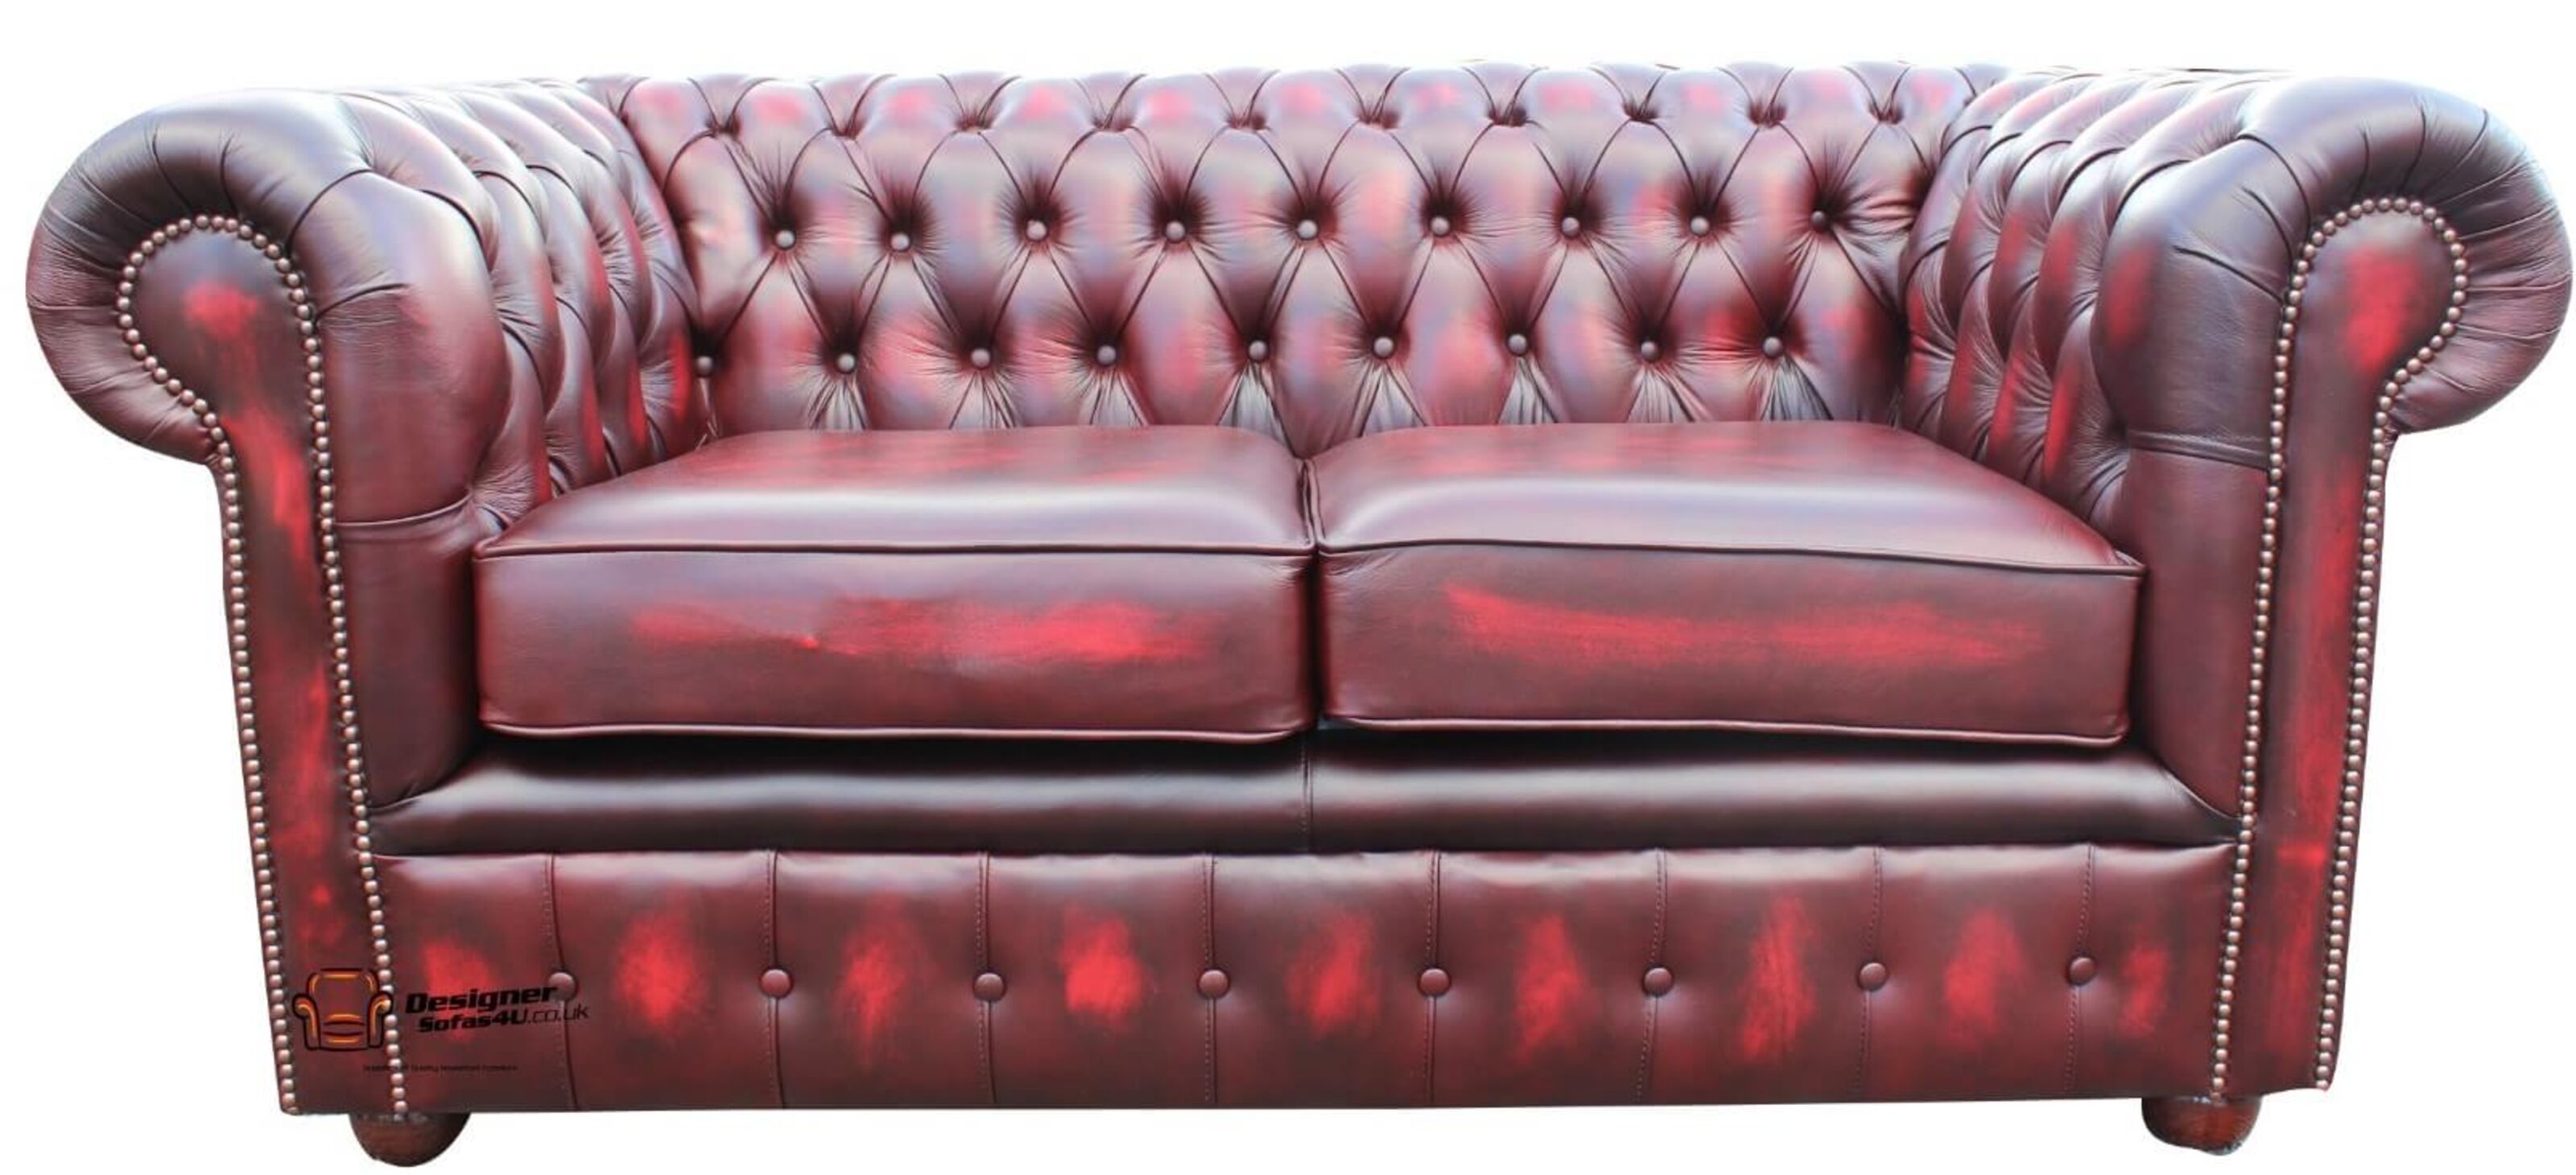 Relax in Style The Comfort of Chesterfield Sofas  %Post Title